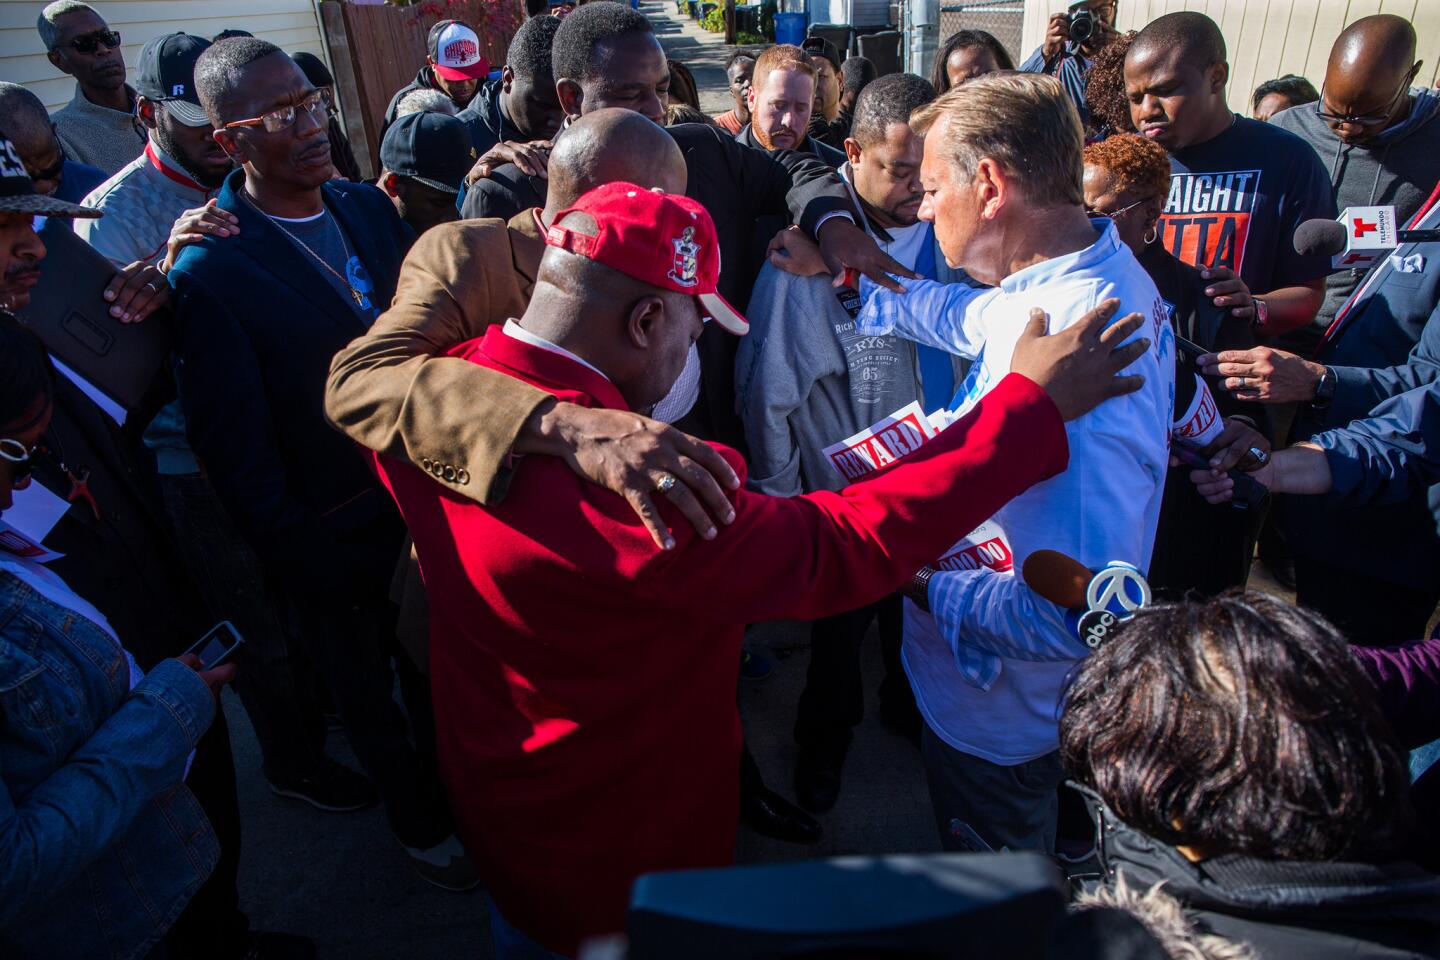 The Rev. Michael Pfleger, holding flier at right center, and members of St. Sabina Catholic Church pray Nov. 3, 2015, in the alley where 9-year-old Tyshawn Lee was fatally shot the day before in the 8000 block of South Damen Avenue, in Chicago's Gresham neighborhood.